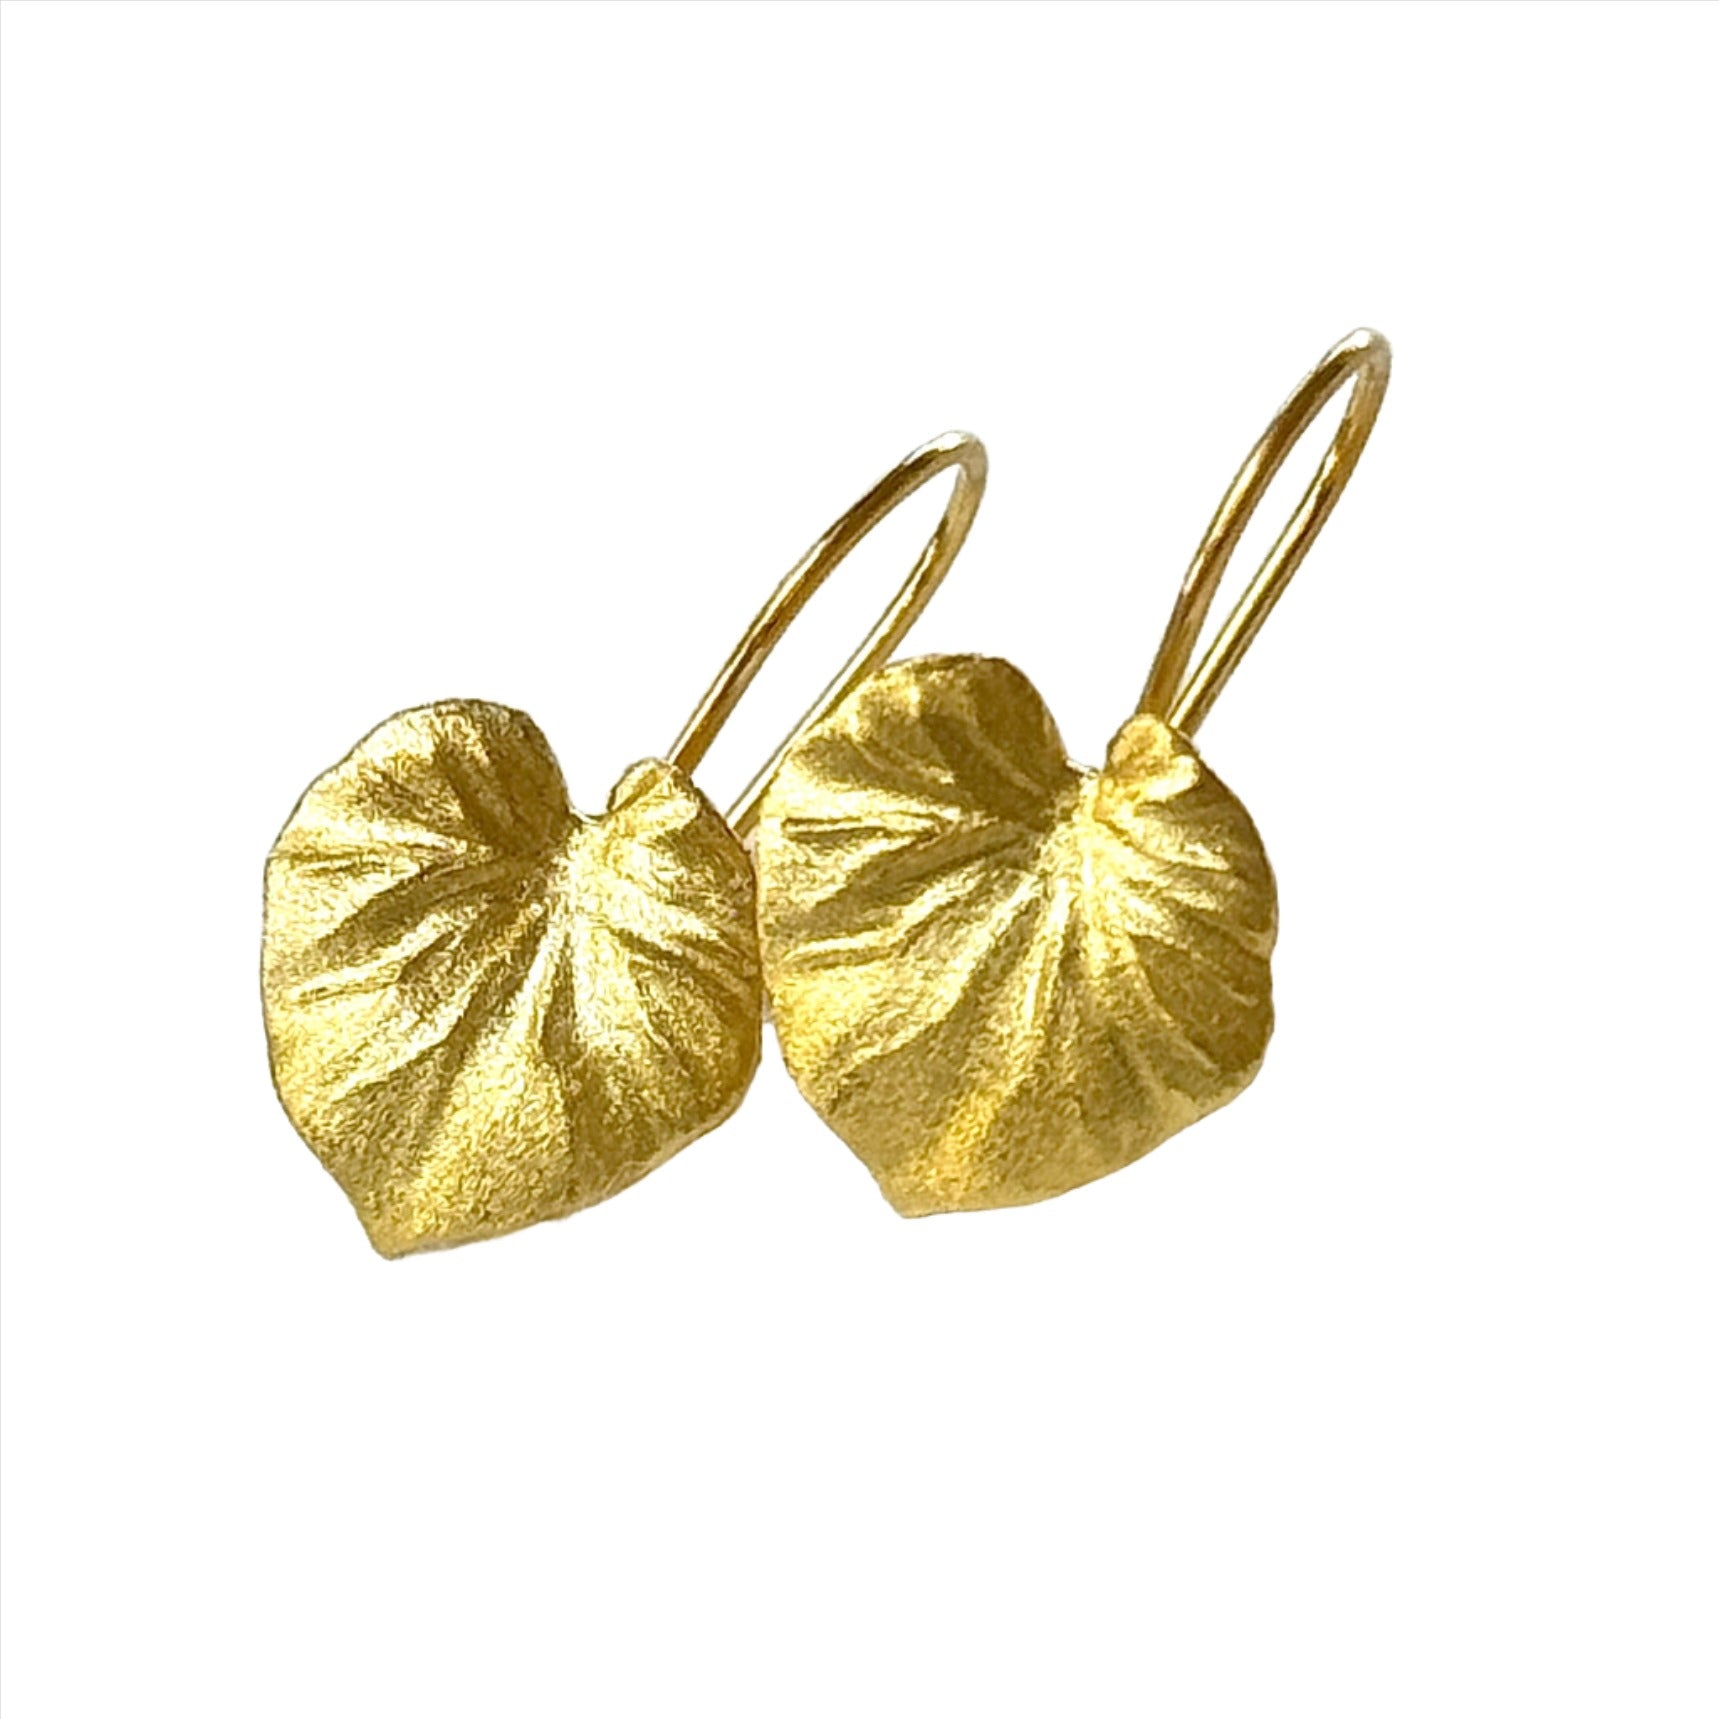 Lilly Pad Earrings (gold or silver)